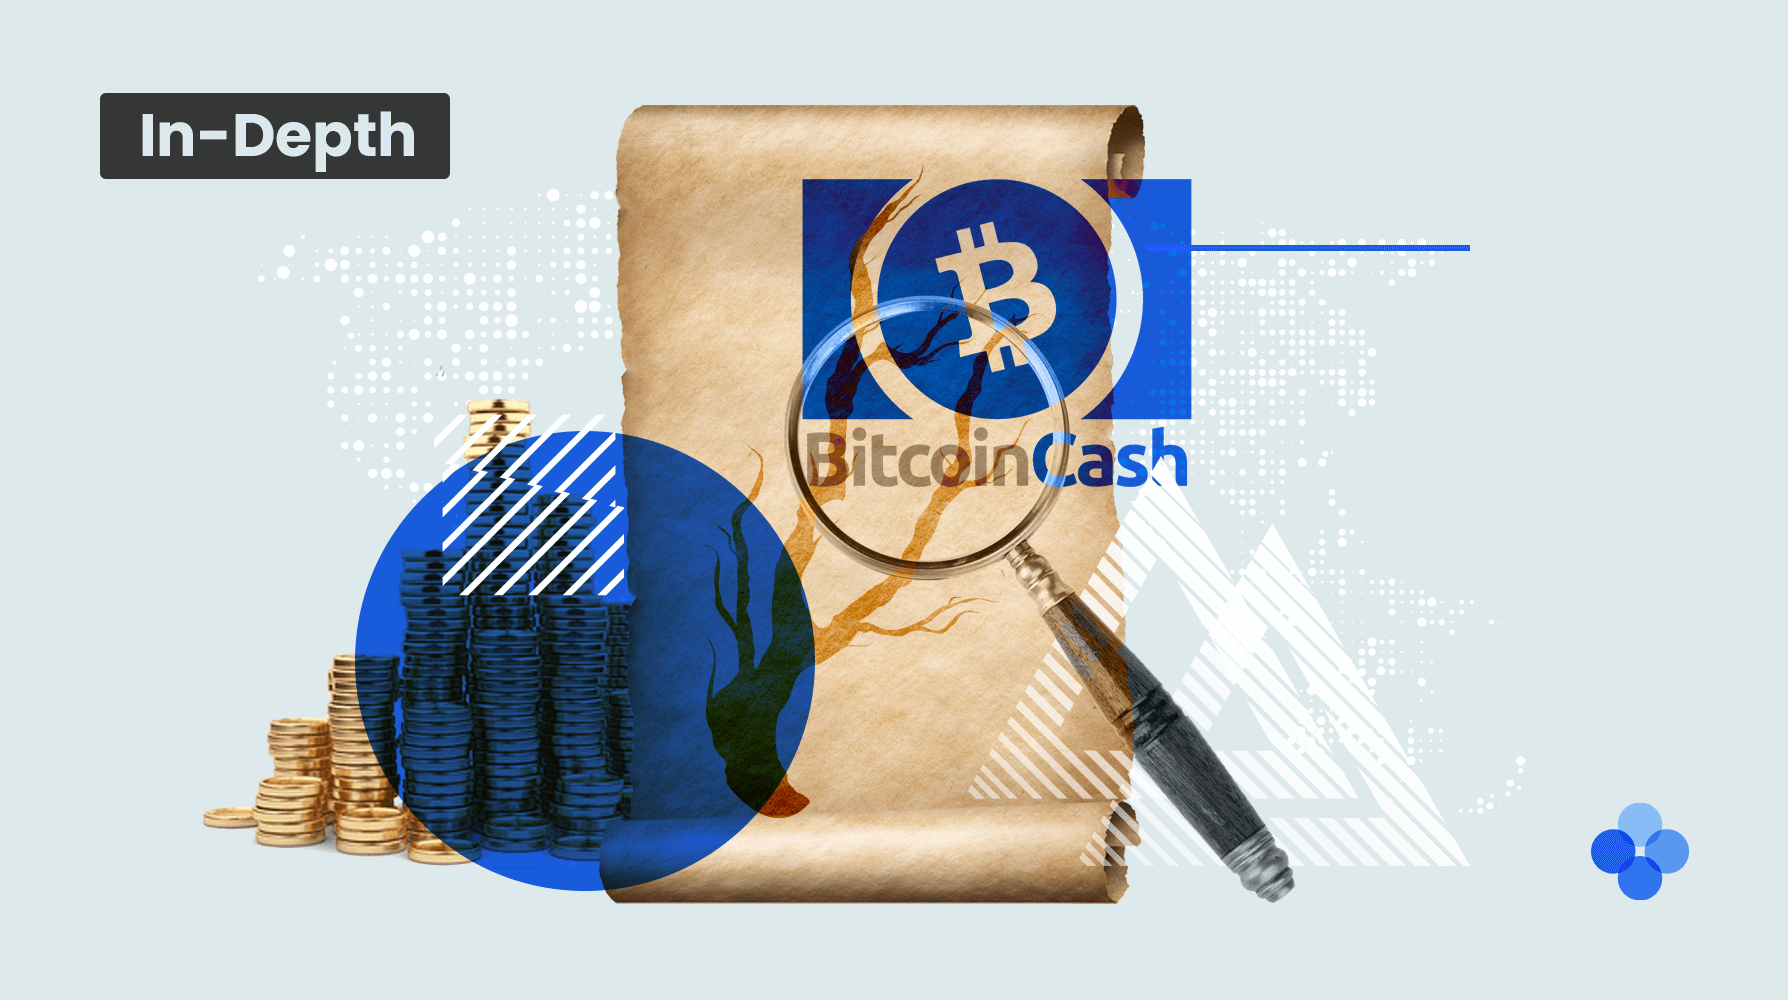 A forking history of Bitcoin Cash: Background, causes and implications of the latest chain split